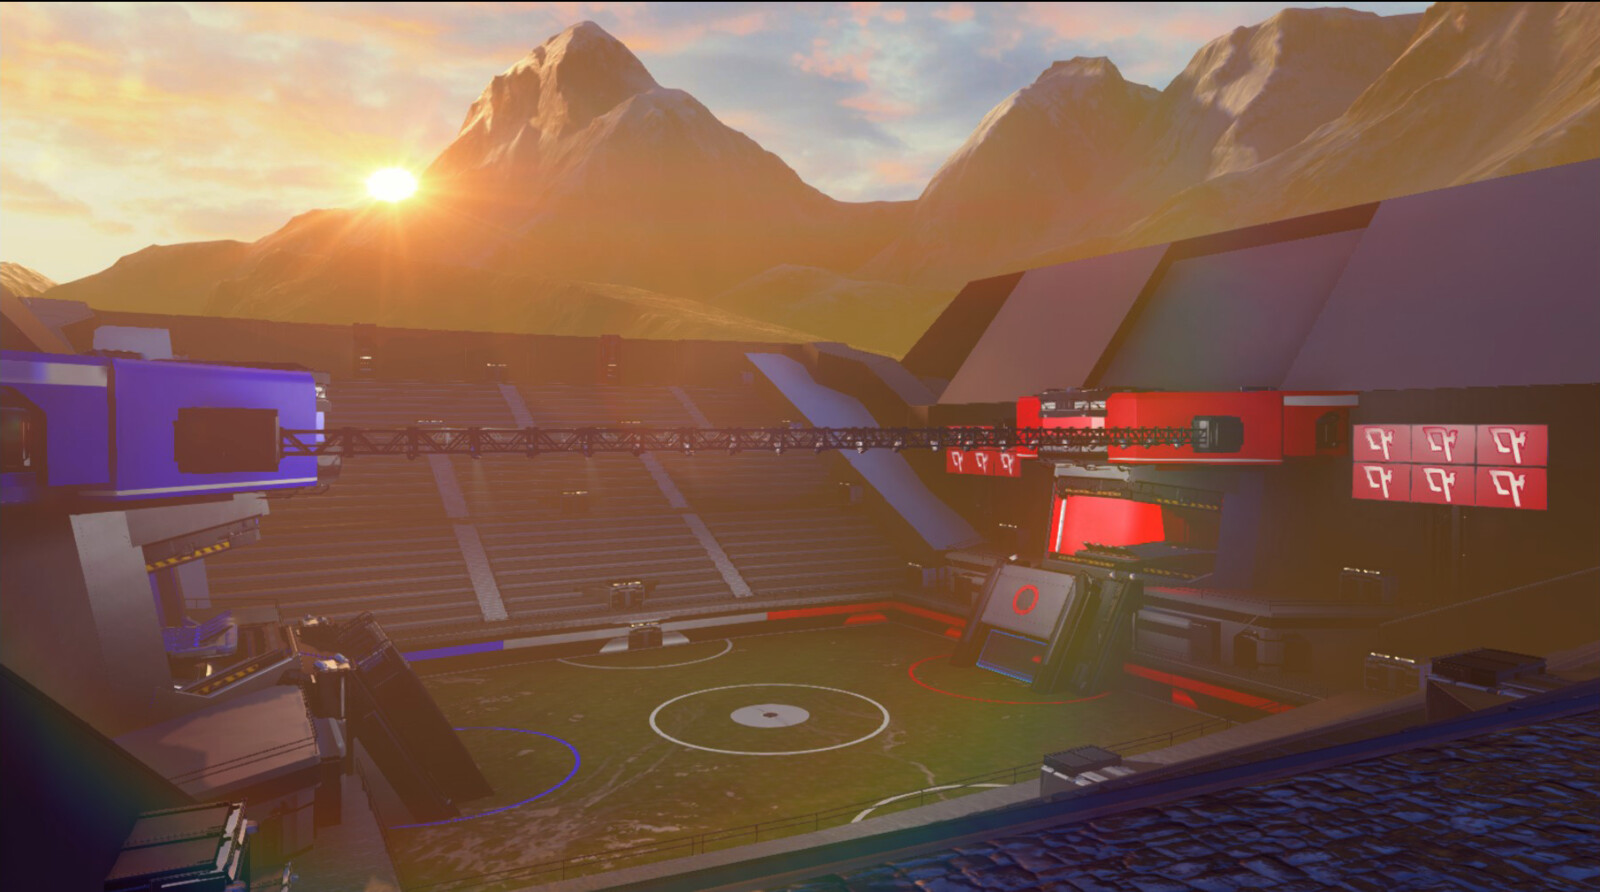 Environment Art &amp; Promotional Image via In-Game Photo Suite

Ricochet Variant of Frontier with run-in goal and throw in 'hoop' for varied play.